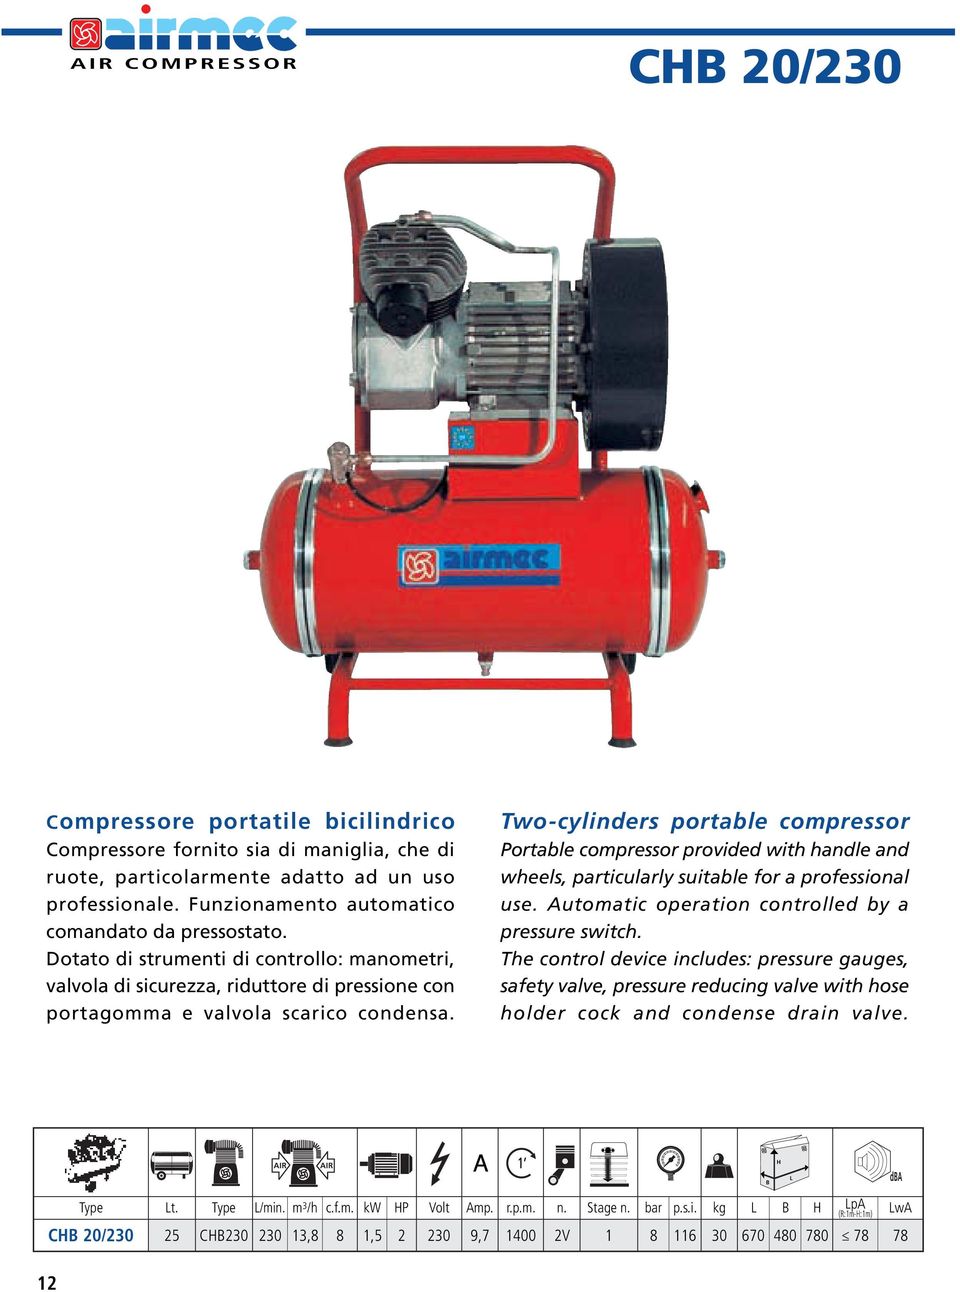 Two-cylinders portable compressor Portable compressor provided with handle and wheels, particularly suitable for a professional use. Automatic operation controlled by a pressure switch.